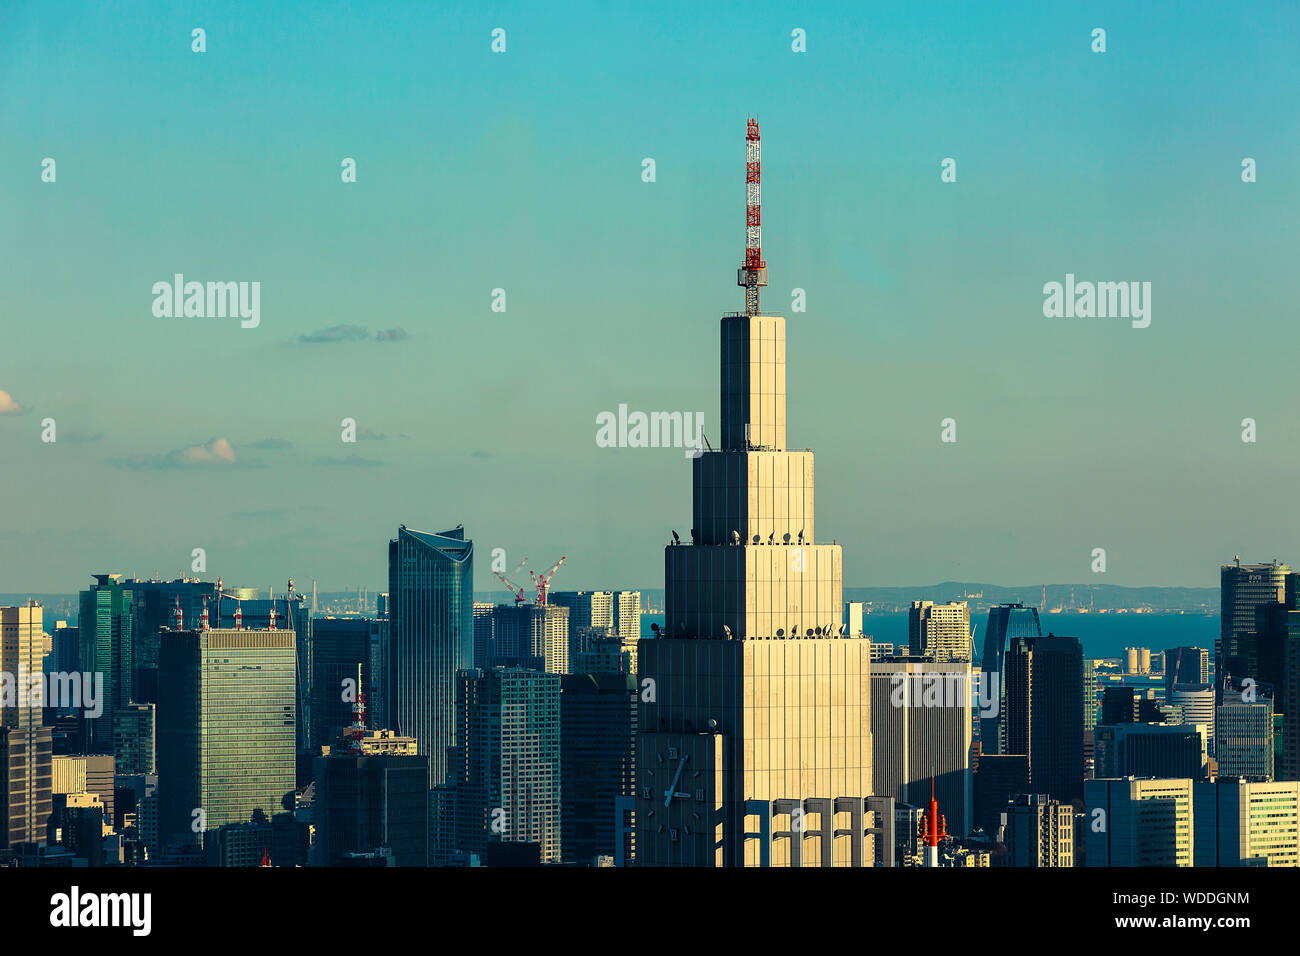 A view of NTT Docomo Yoyogi building and close skyscrapers as seen from the Metropolitan Government building in downtown Tokyo. Stock Photo